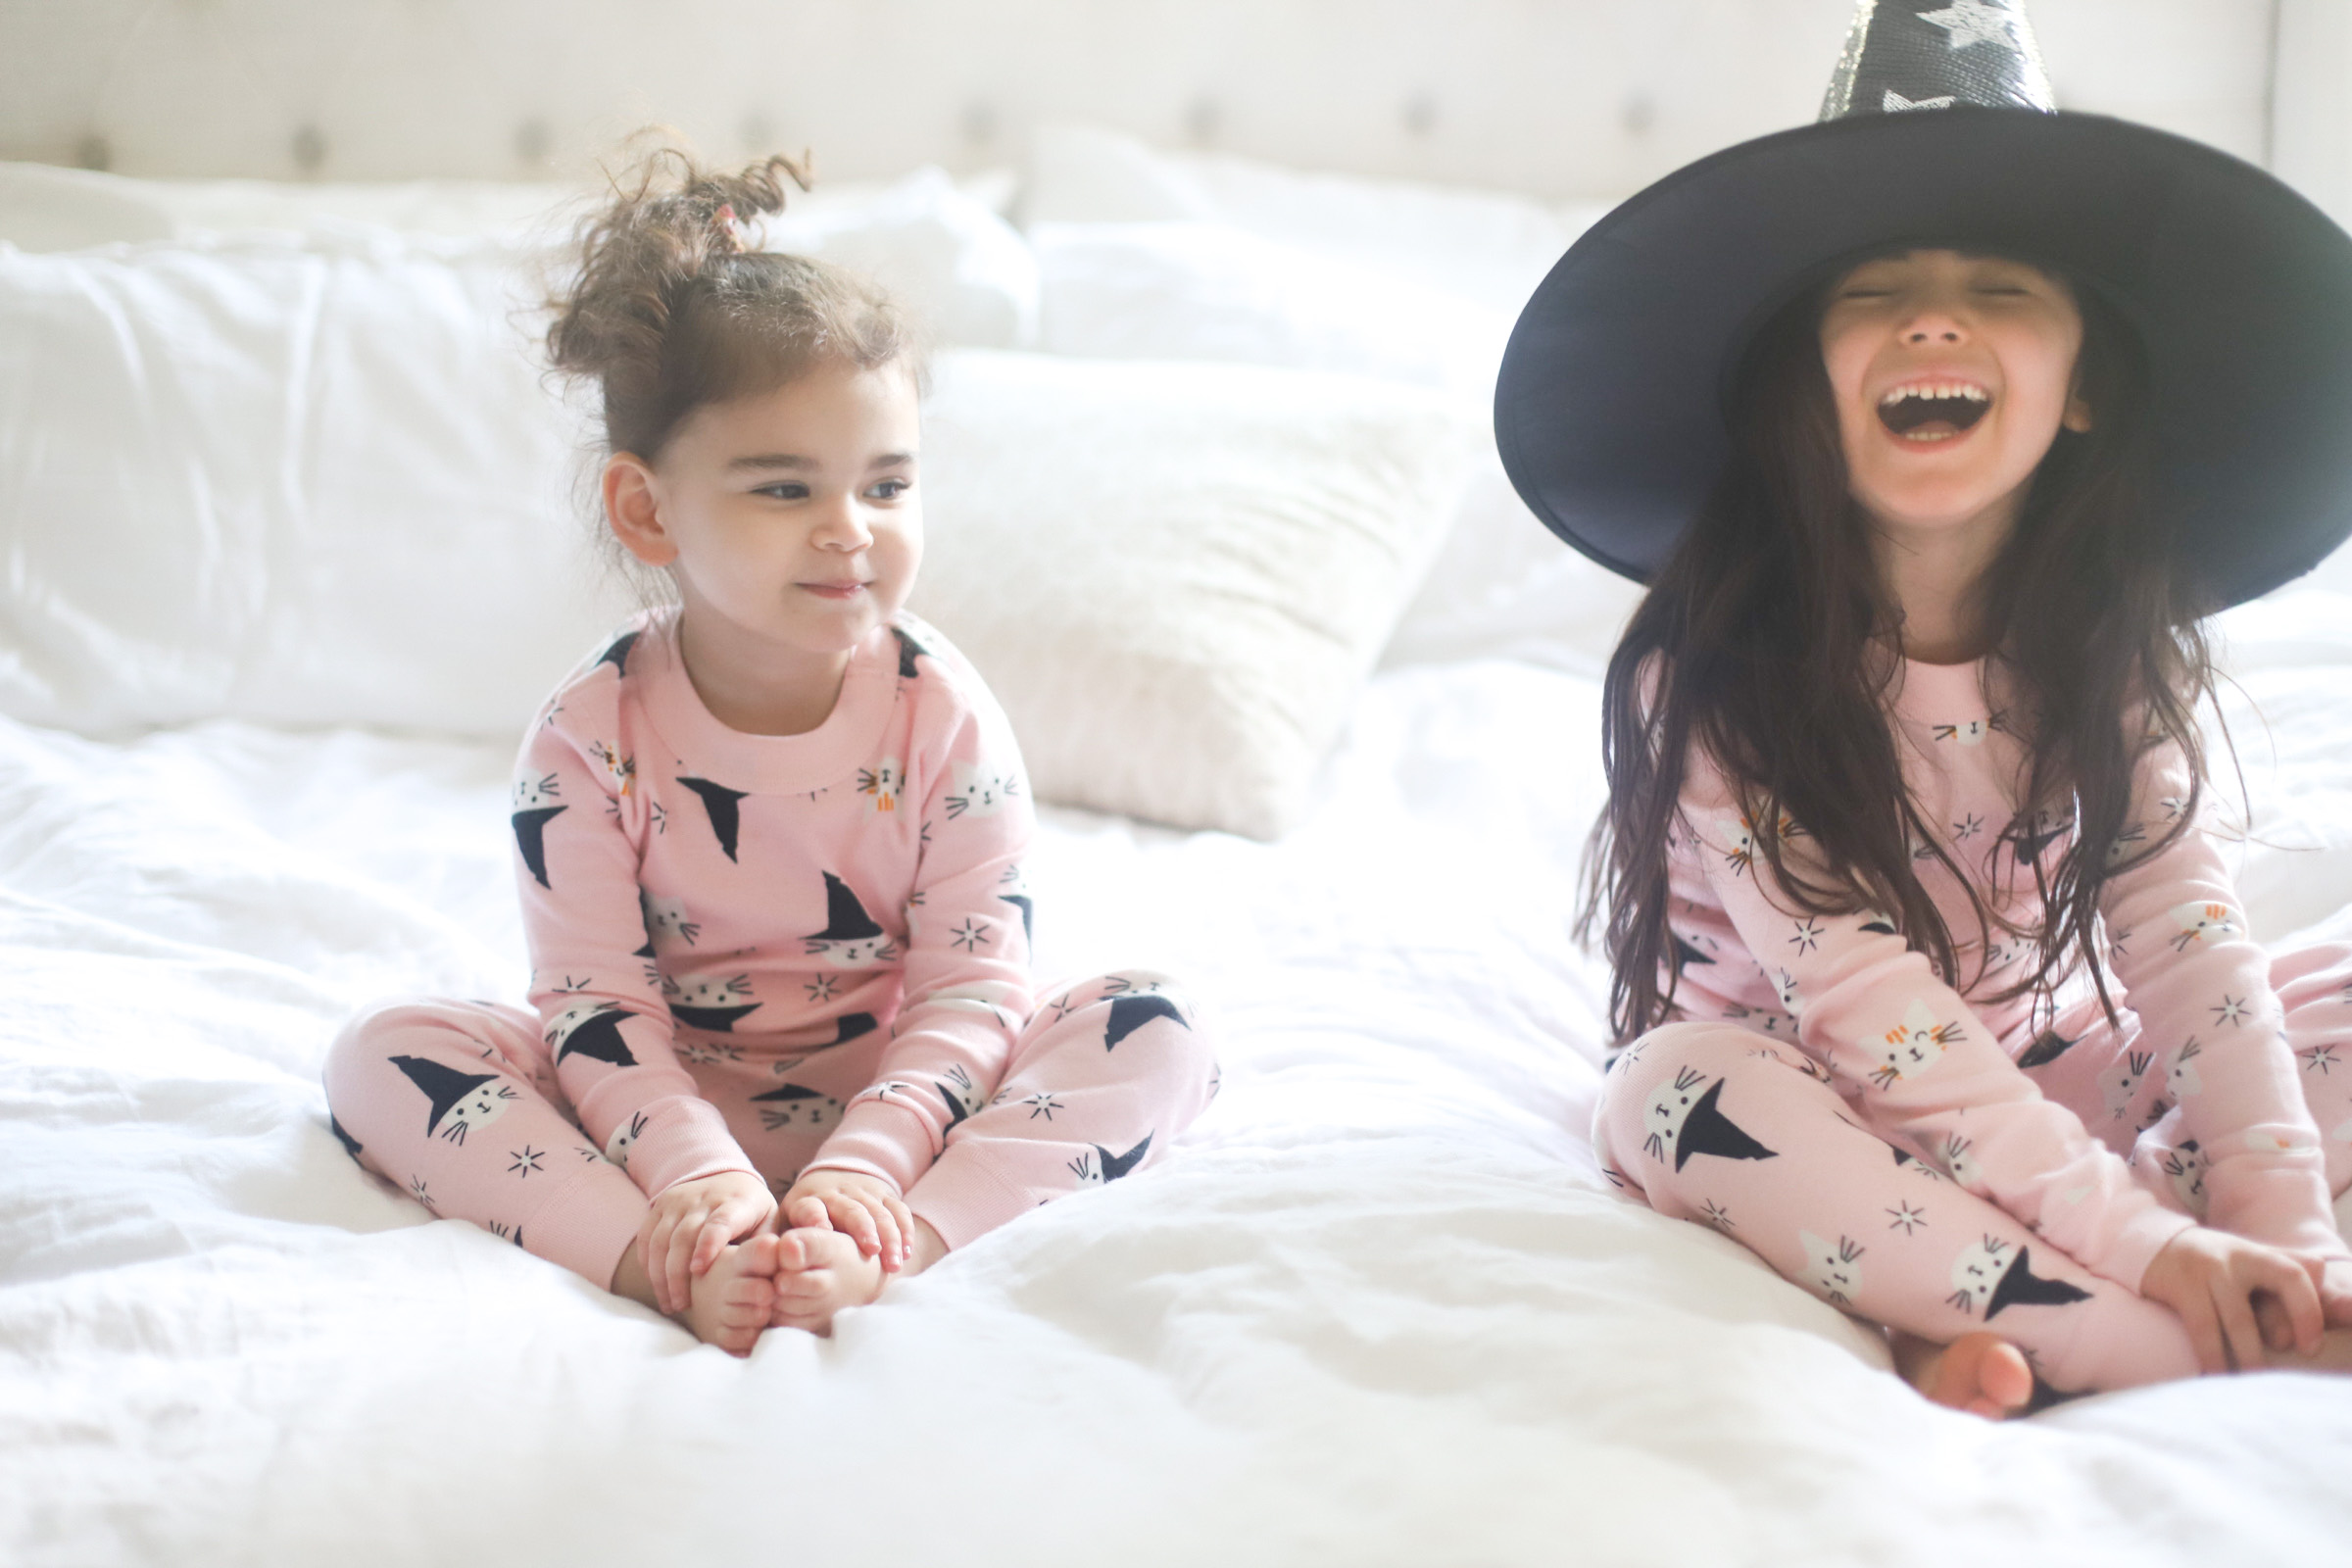 Get spooky and festive and dress your kids in the cutest matching Halloween pajamas this year! It’s the sweetest family tradition. | @glitterinclexi | GLITTERINC.COM